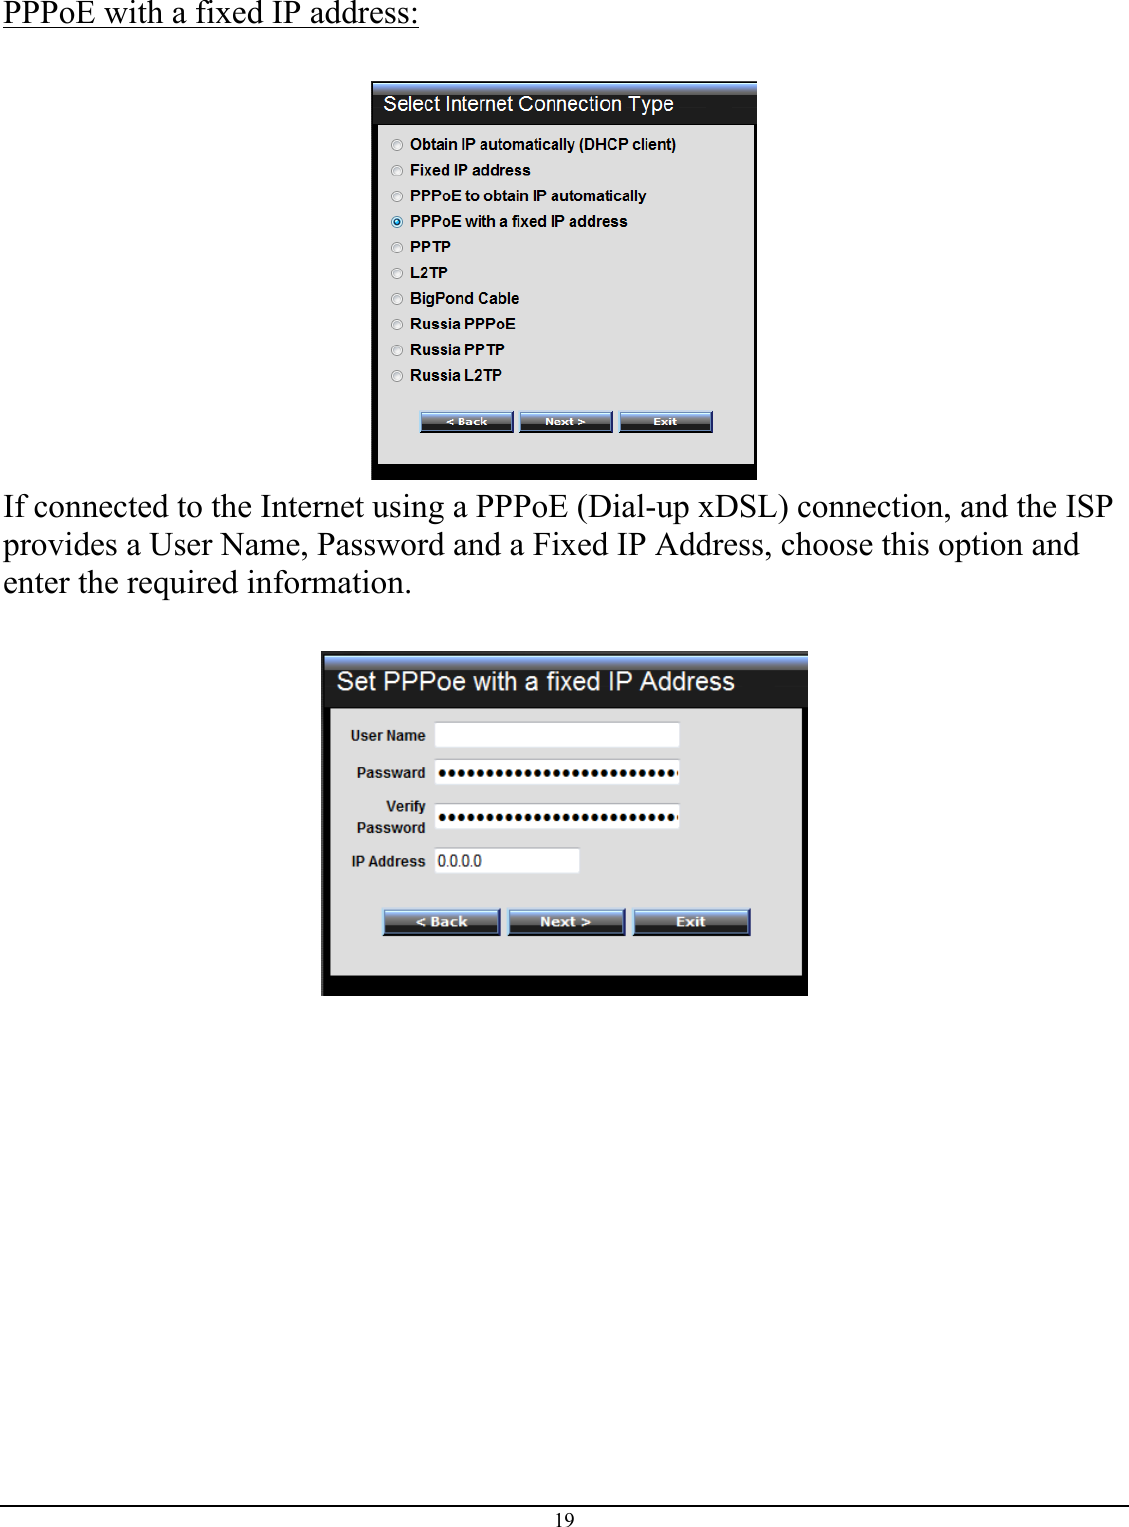 19  PPPoE with a fixed IP address:   If connected to the Internet using a PPPoE (Dial-up xDSL) connection, and the ISP provides a User Name, Password and a Fixed IP Address, choose this option and enter the required information.   